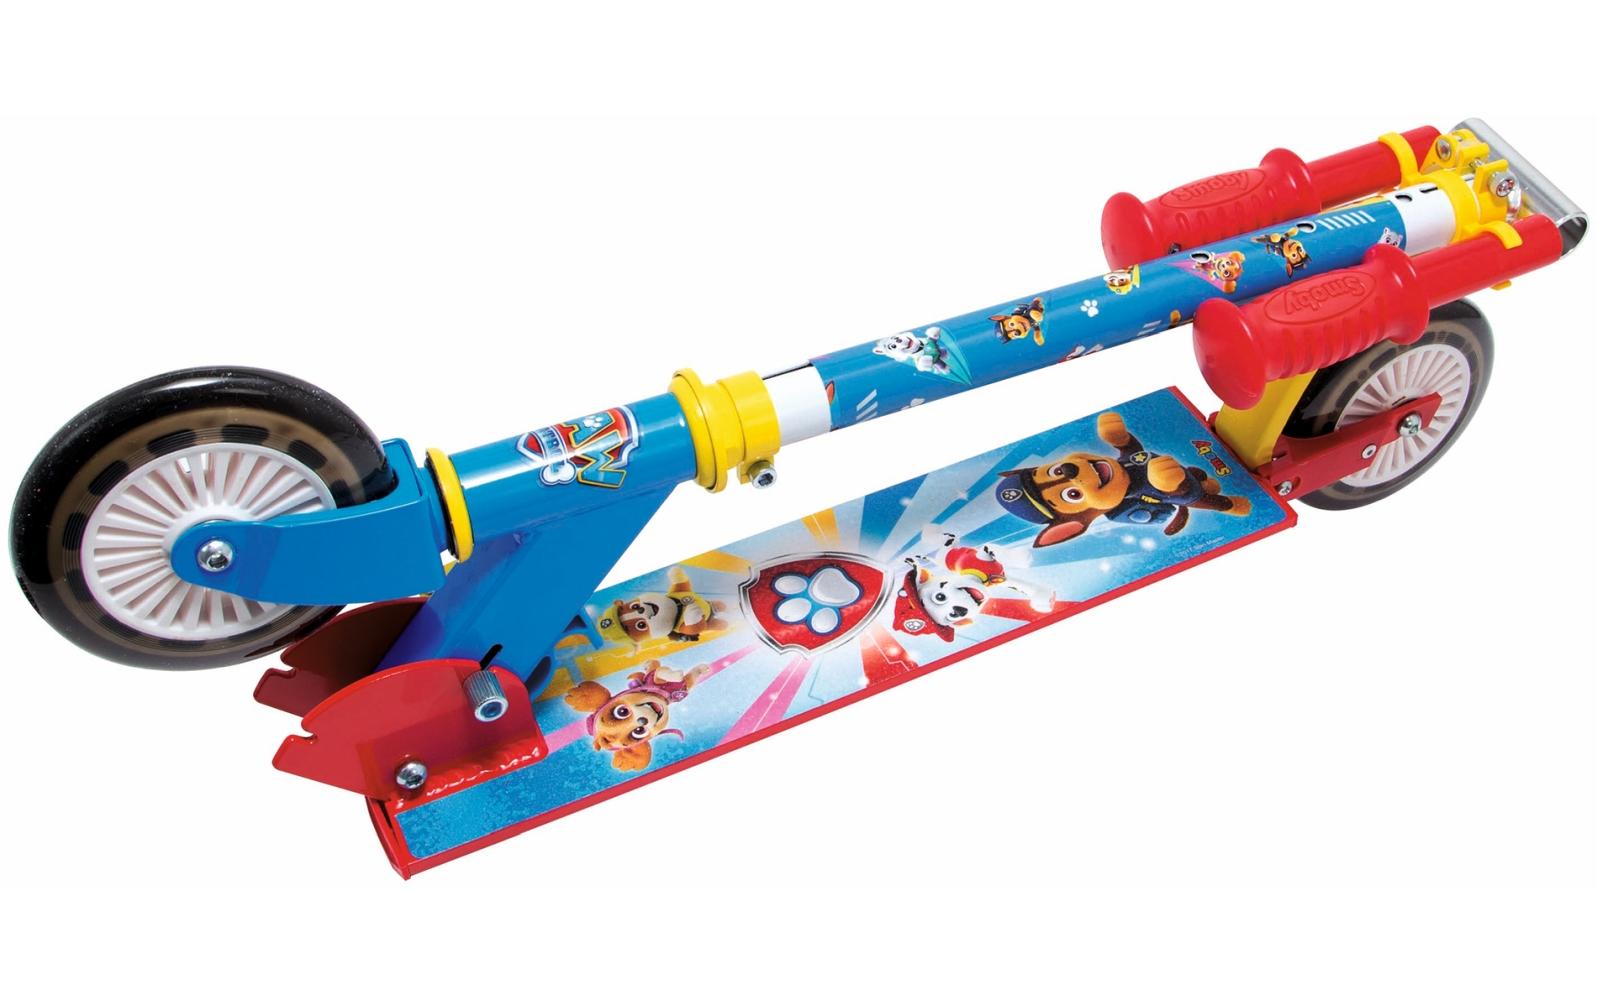 Smoby Scooter Paw Patrol Roller mit Bremse